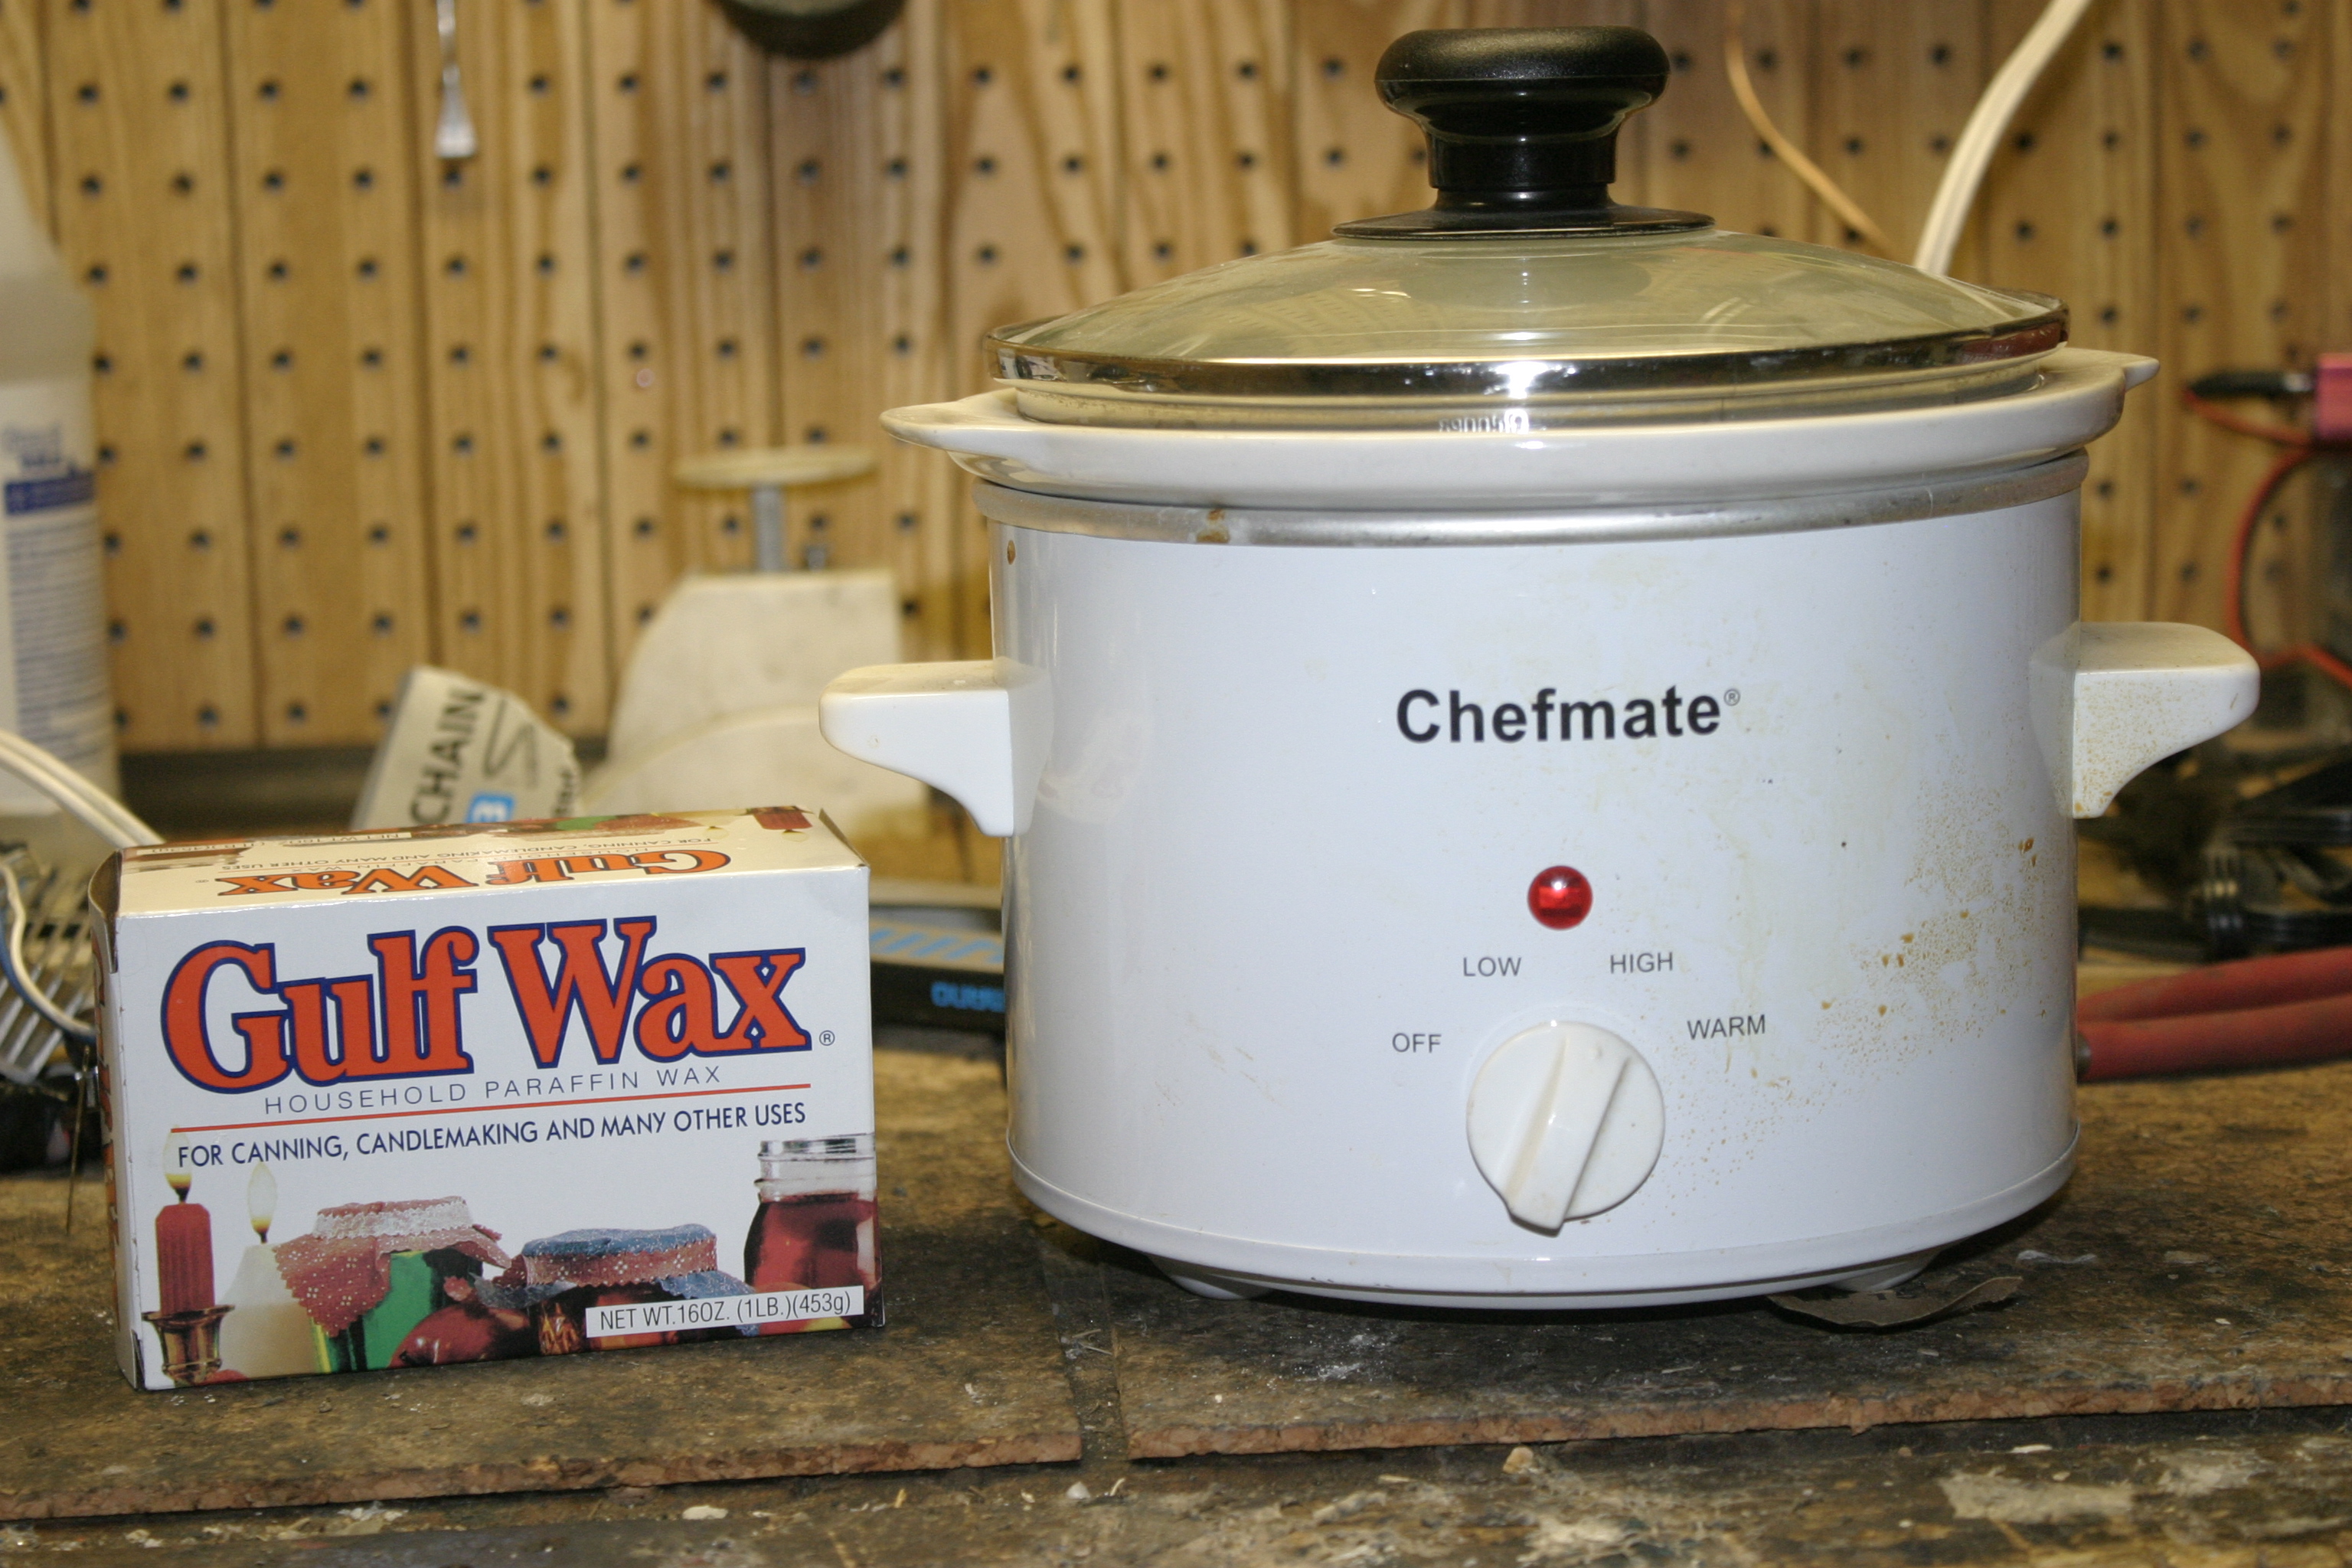 Gulf Wax Household Paraffin Wax for Canning & Candlemaking - 16 oz